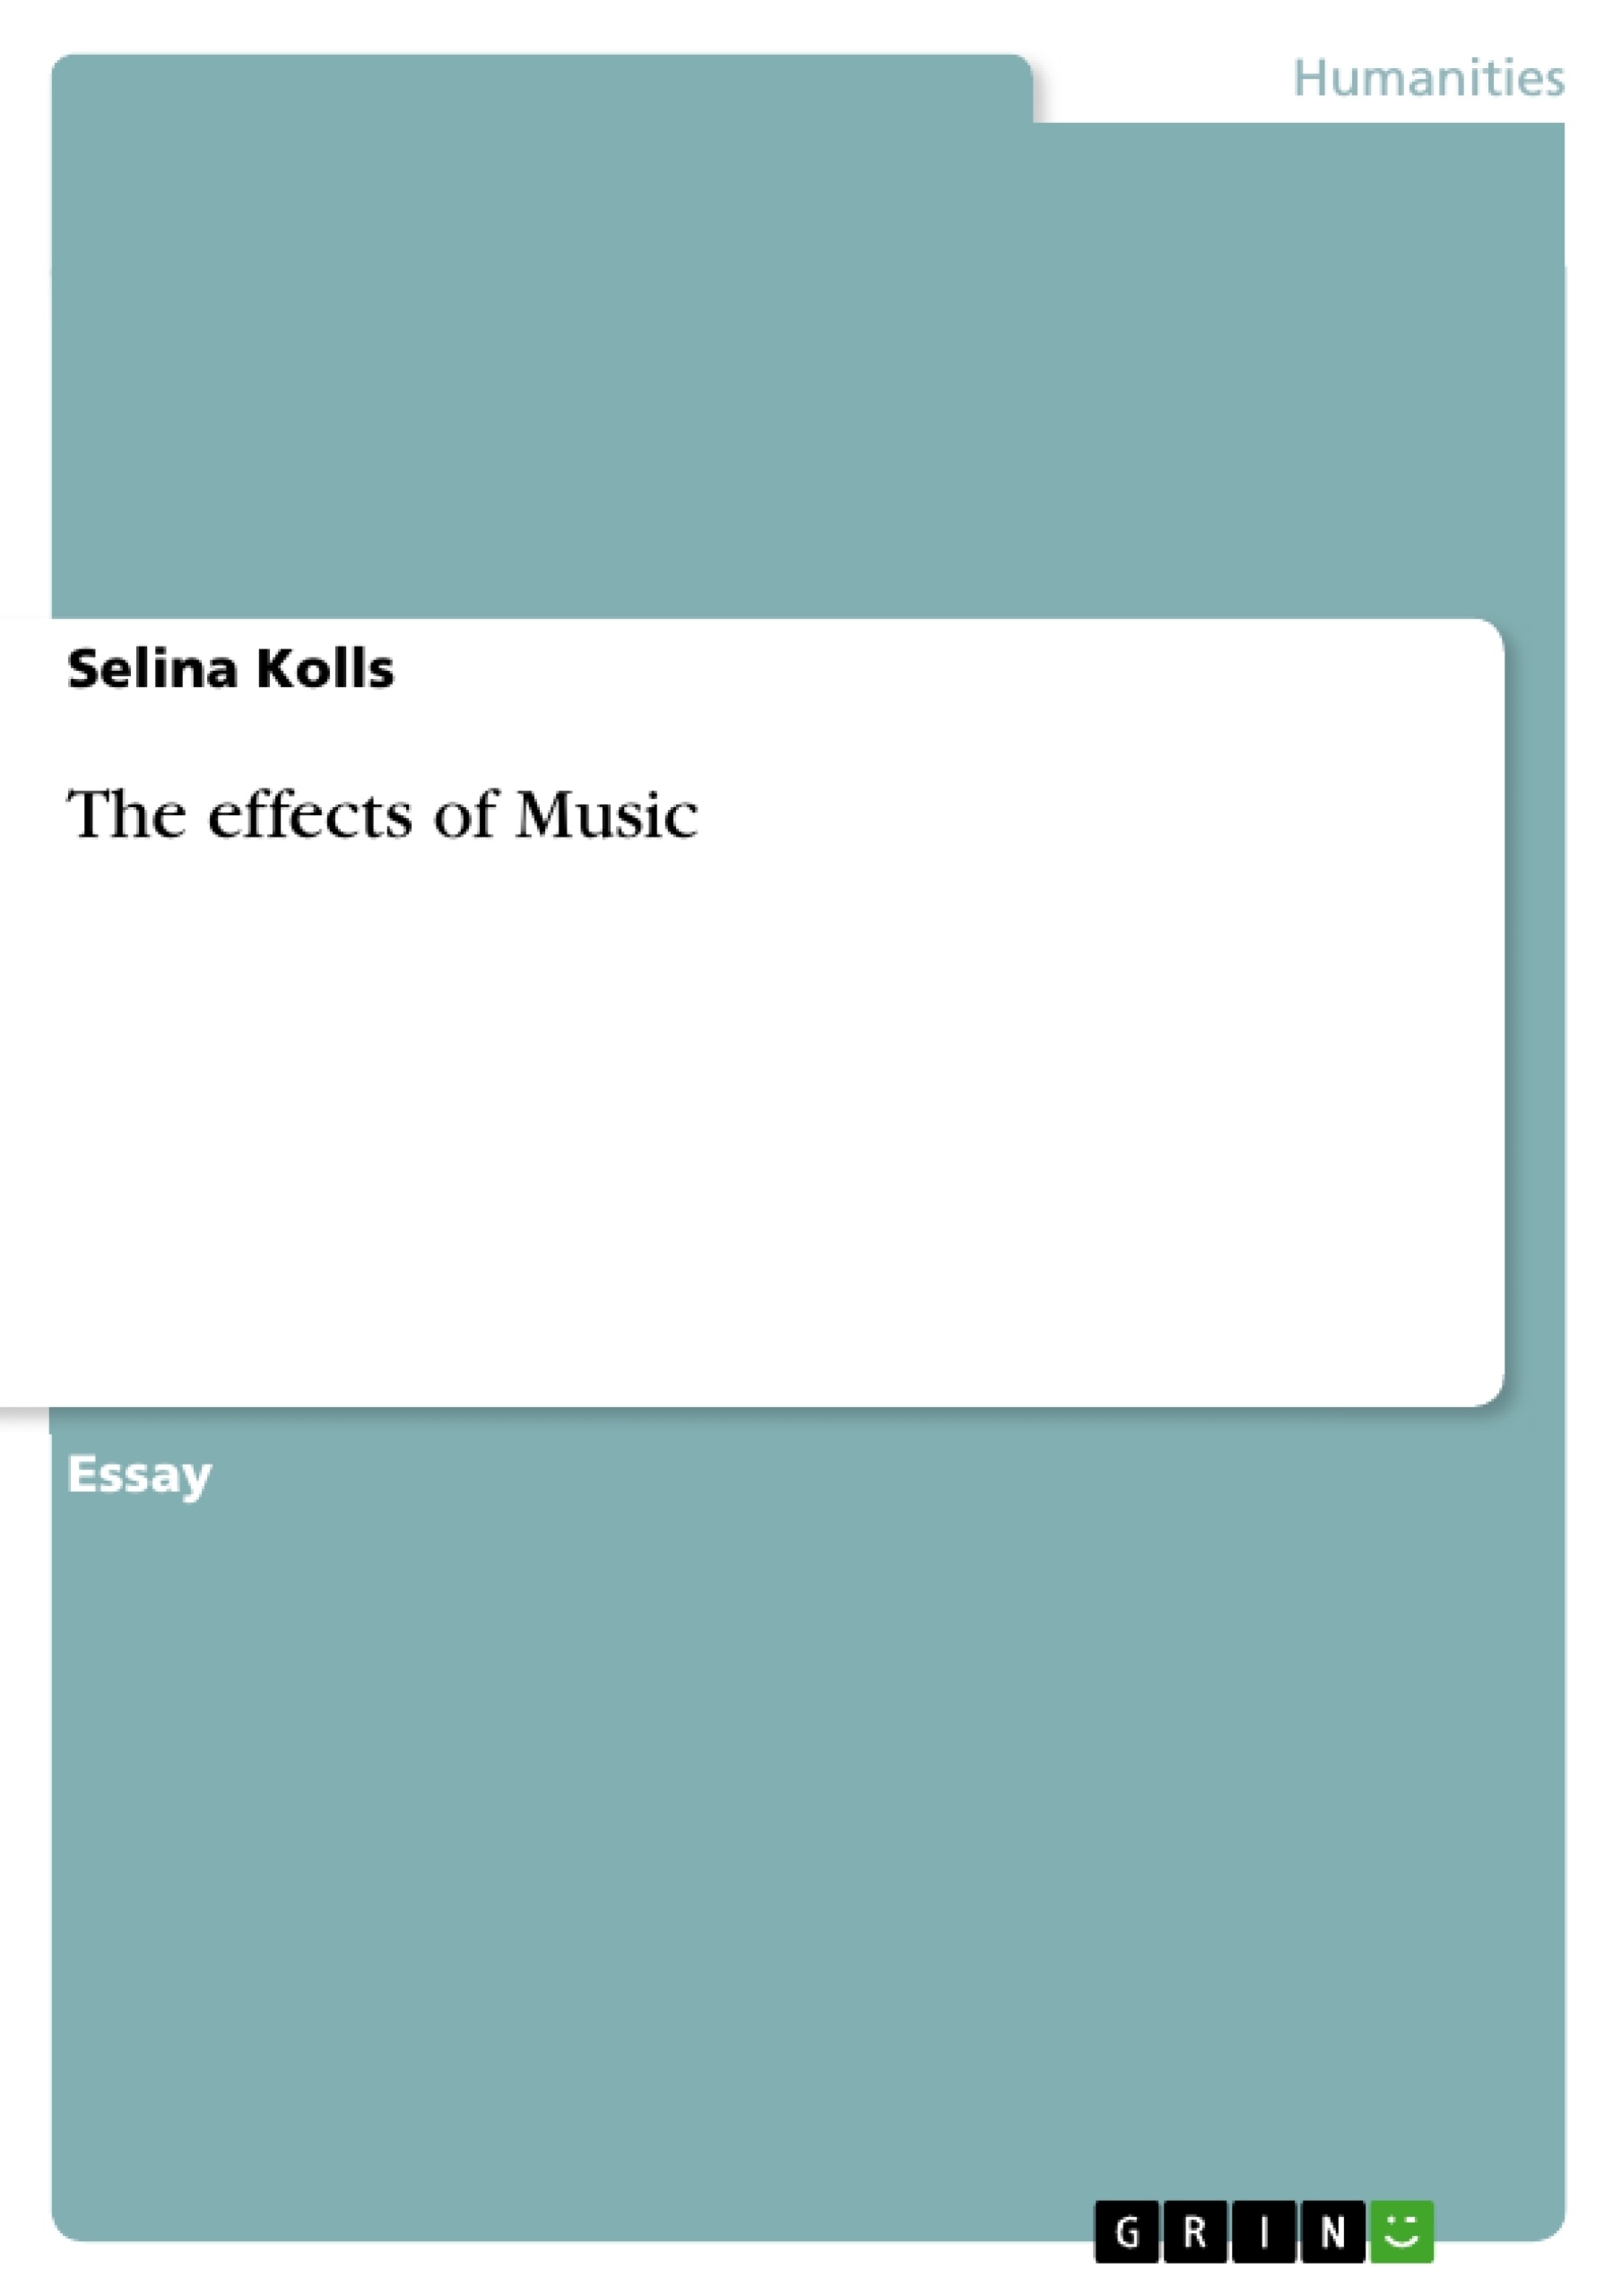 Title: The effects of Music